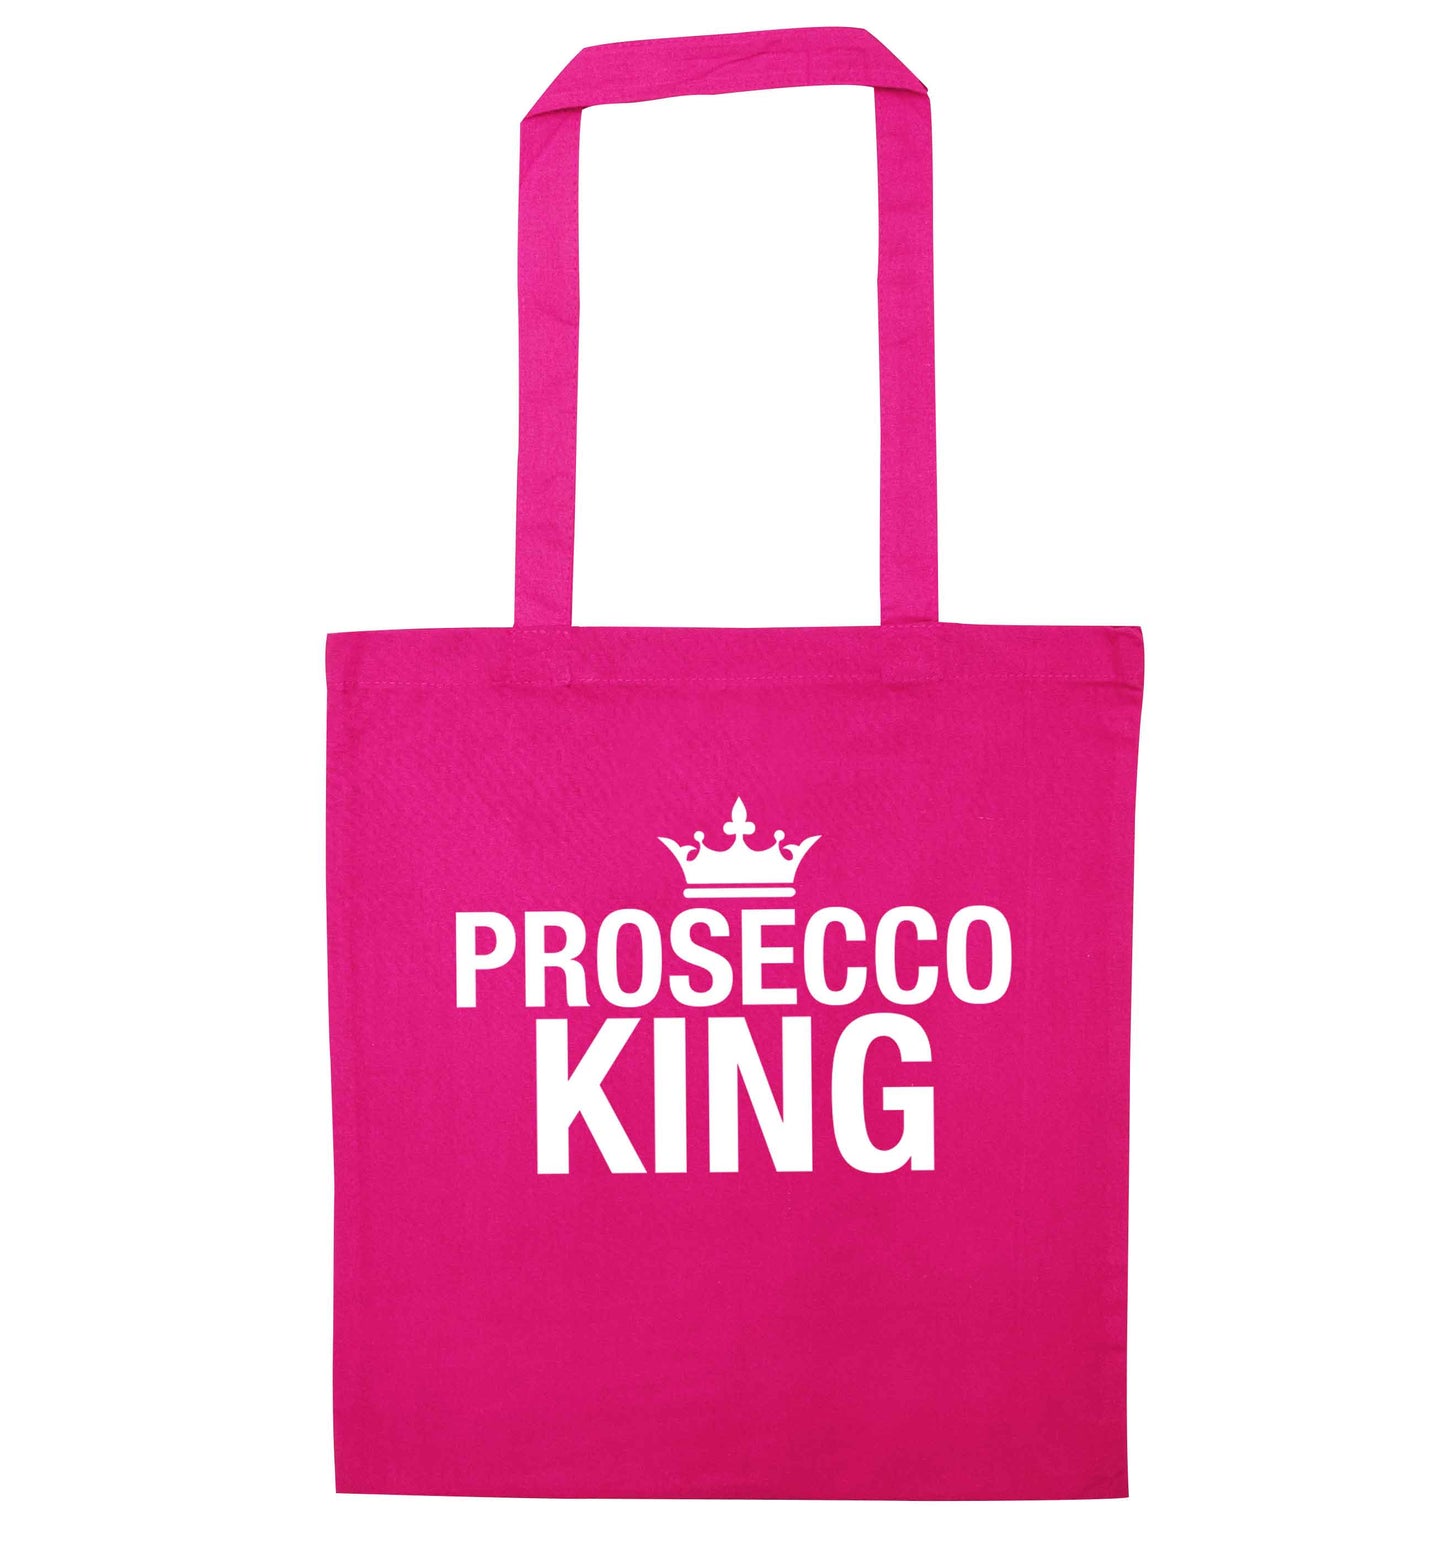 Prosecco king pink tote bag